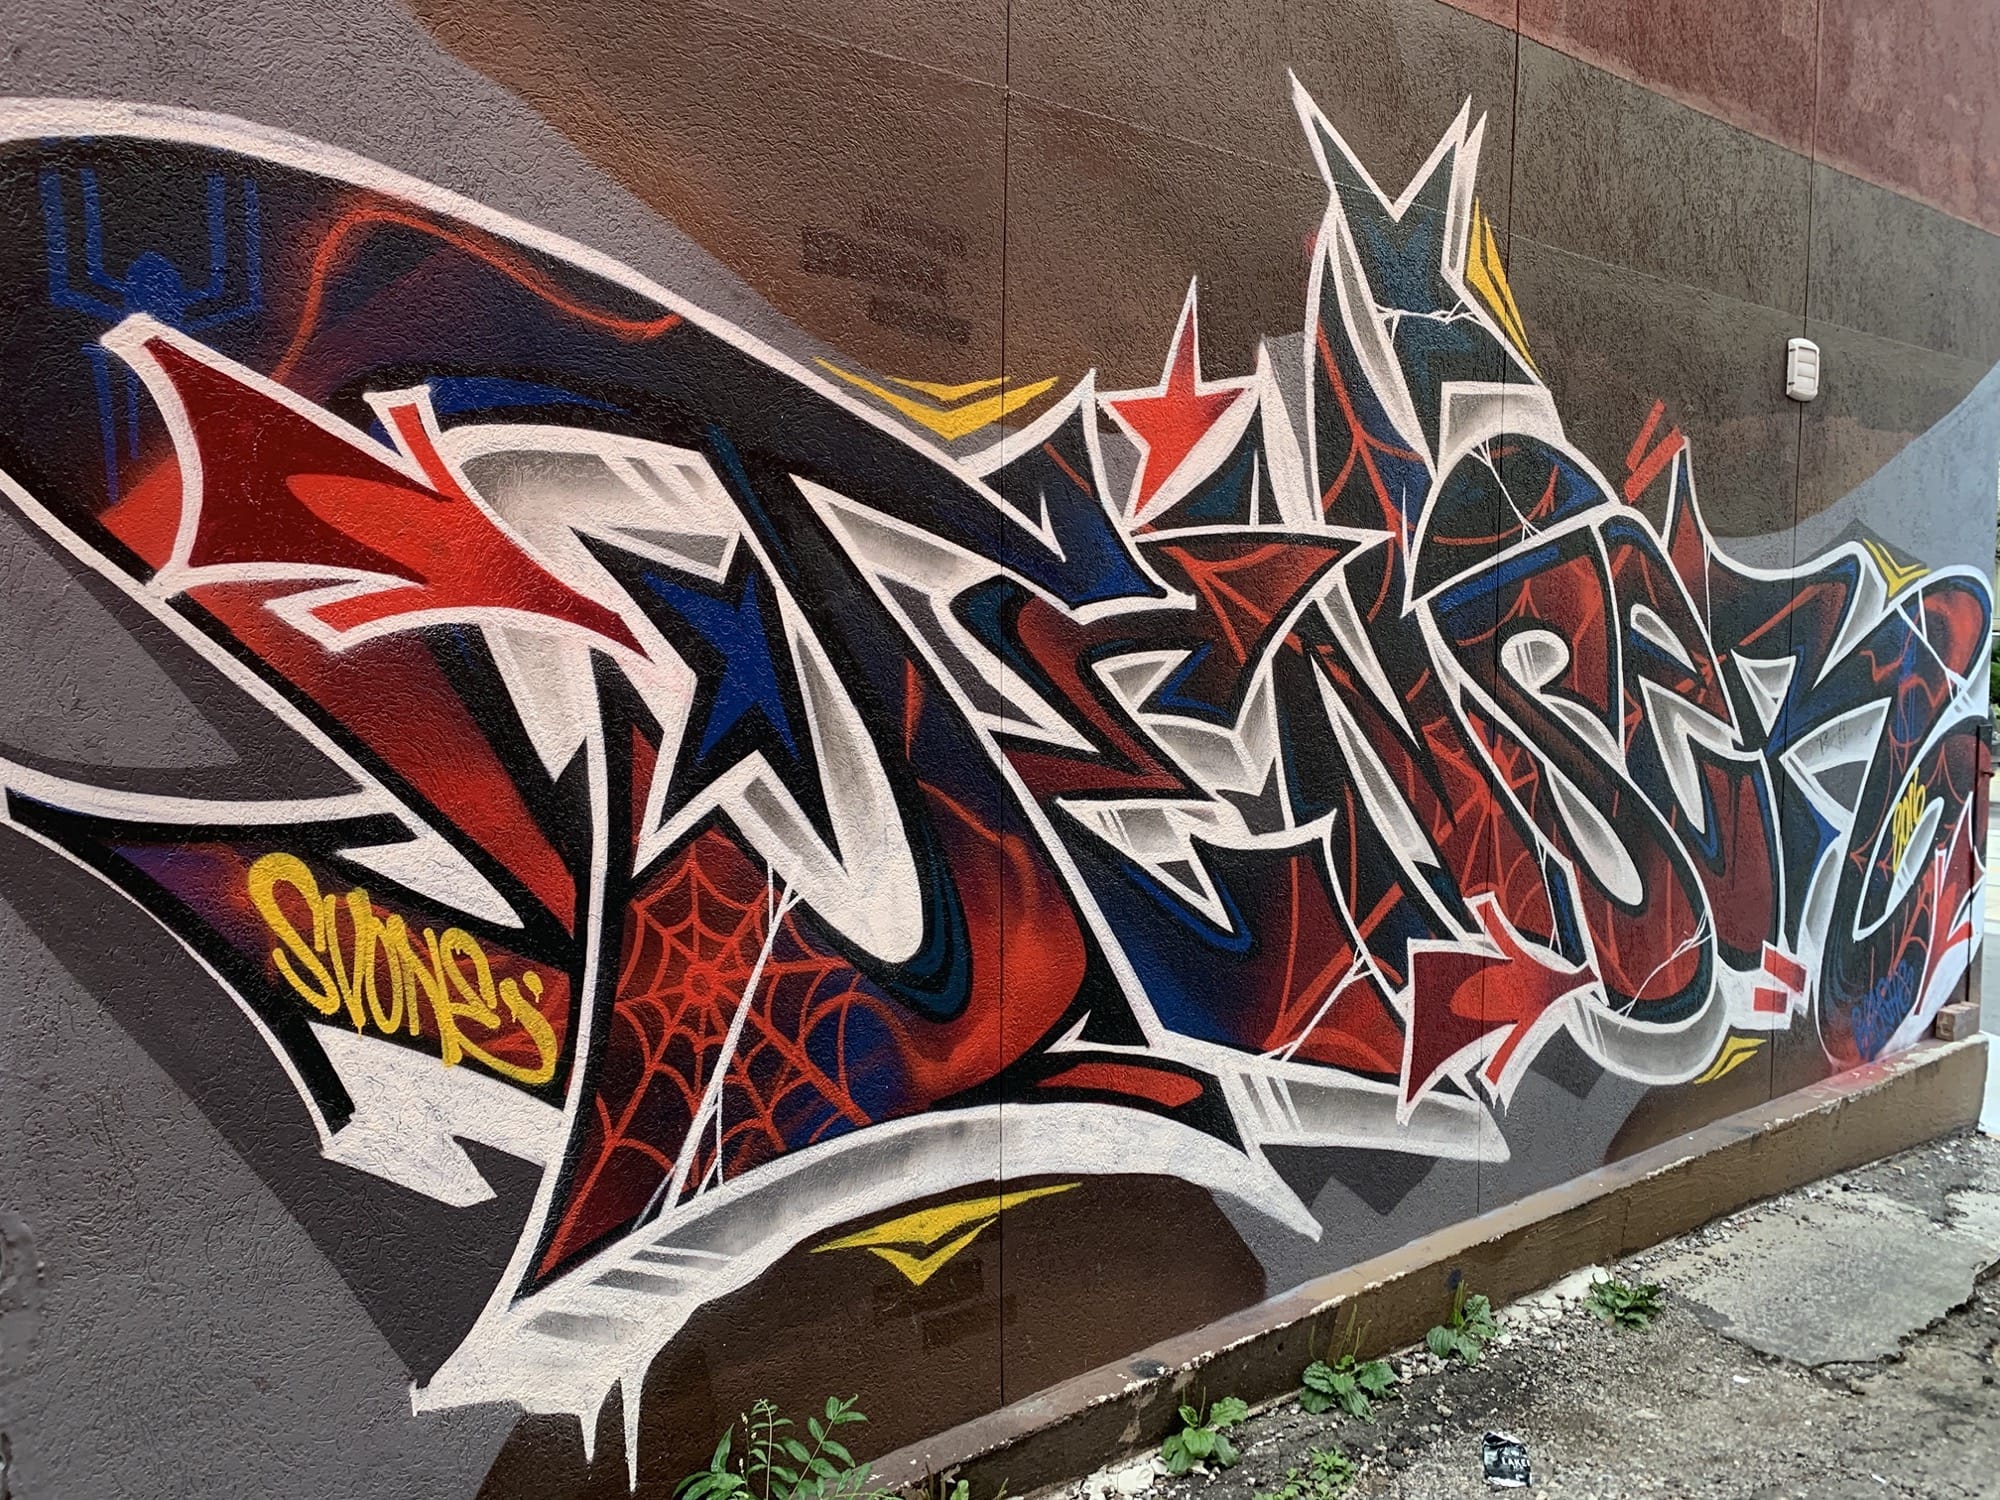 Graffiti 2471  captured by Rabot in Toronto Canada